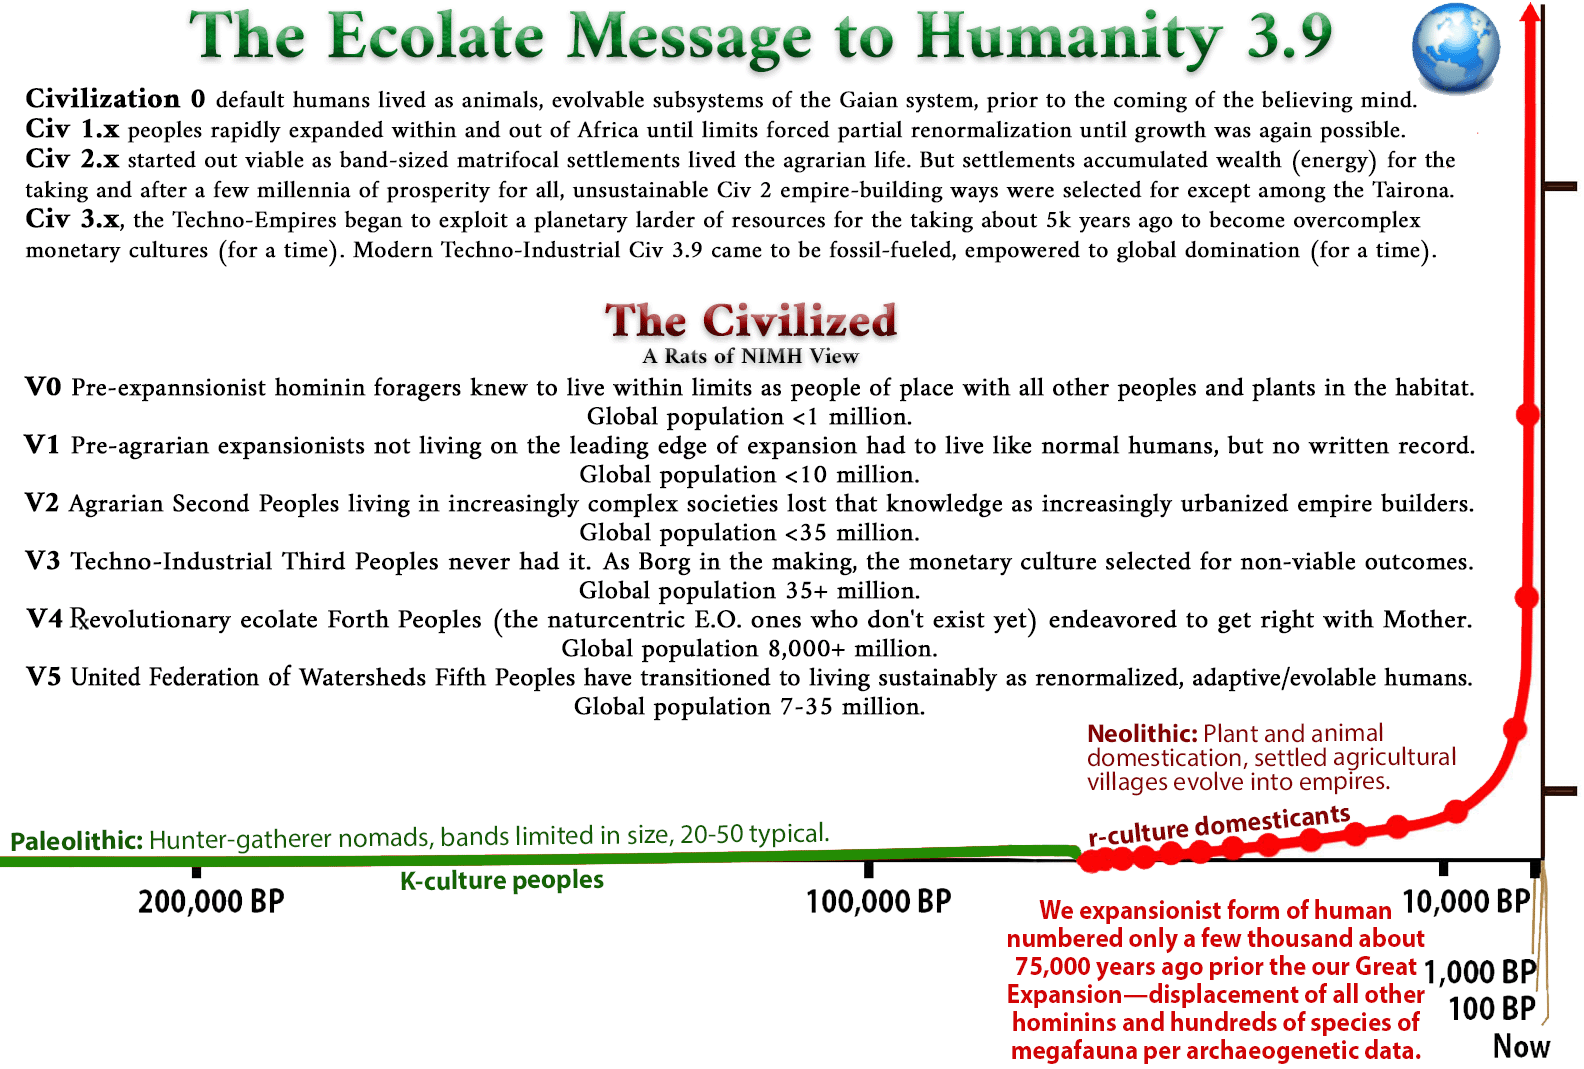 The Ecolate Message to Humanity 3.0